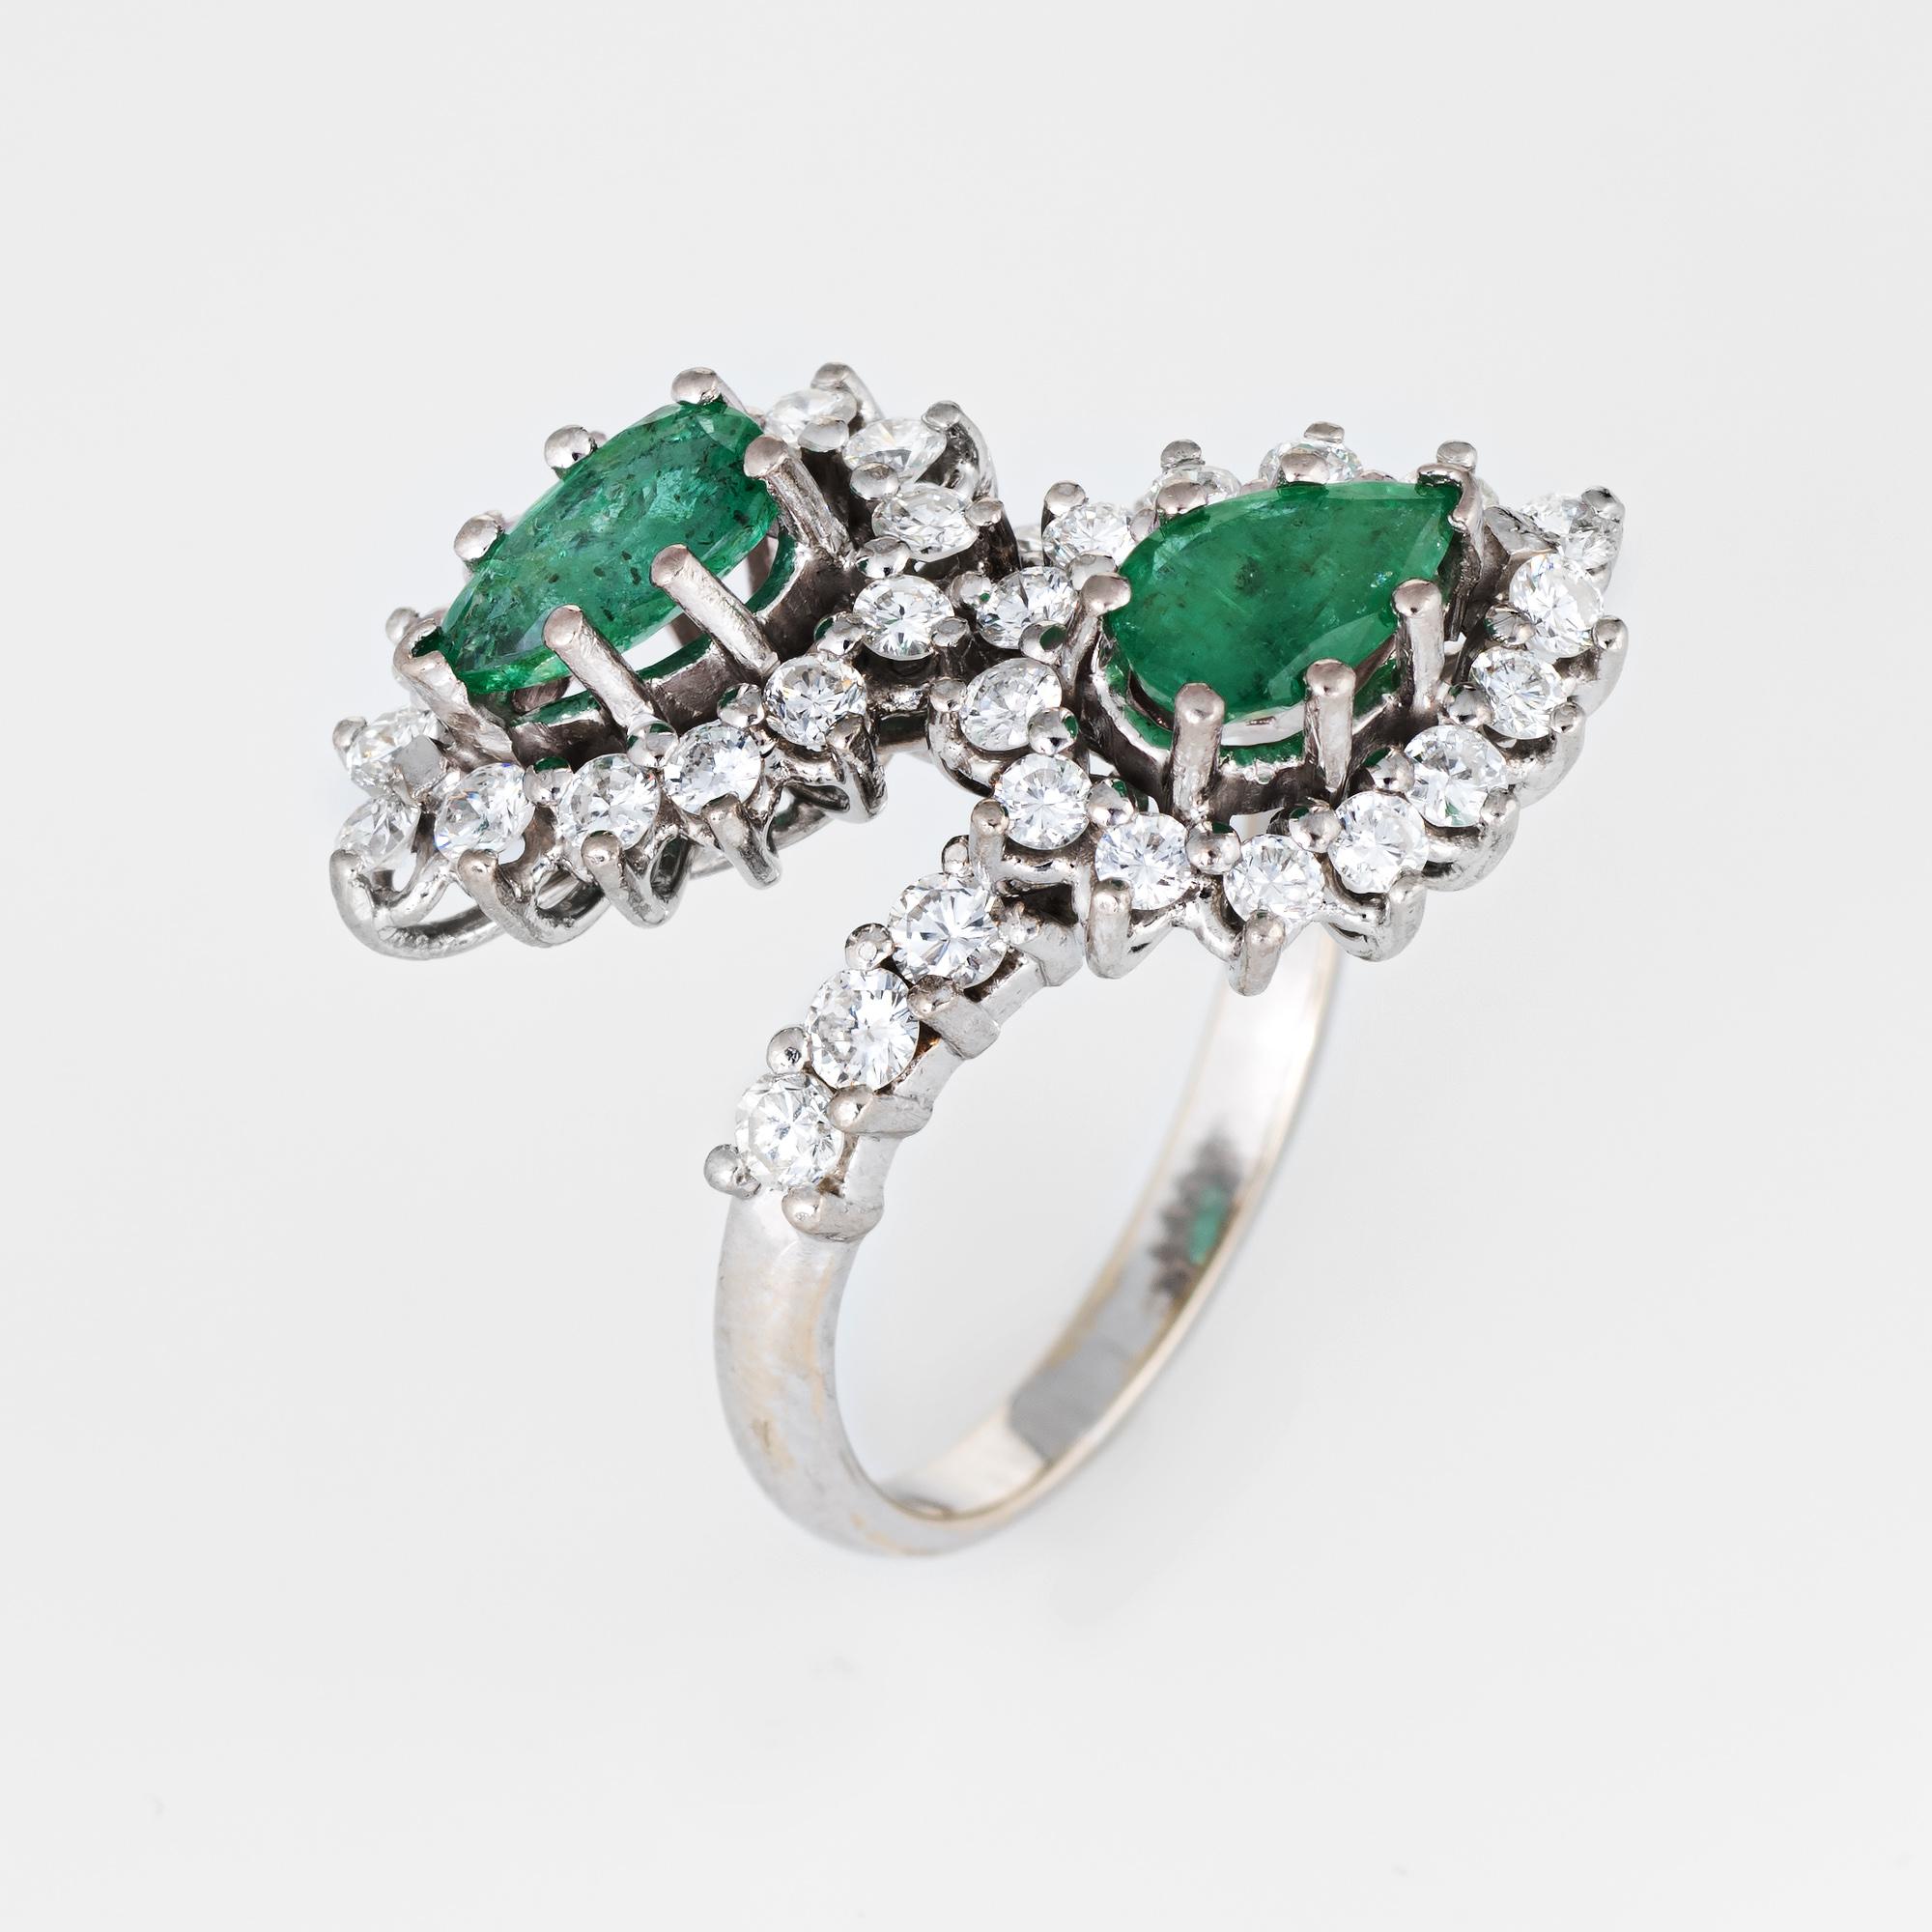 Vintage emerald & diamond bypass ring (circa 1960s to 1970s) crafted in 18 karat white gold. 

Two faceted pear cut emeralds each measure 7mm x 4mm (estimated at 0.50 carats each - 1 carat total estimated weight). The round brilliant cut diamonds